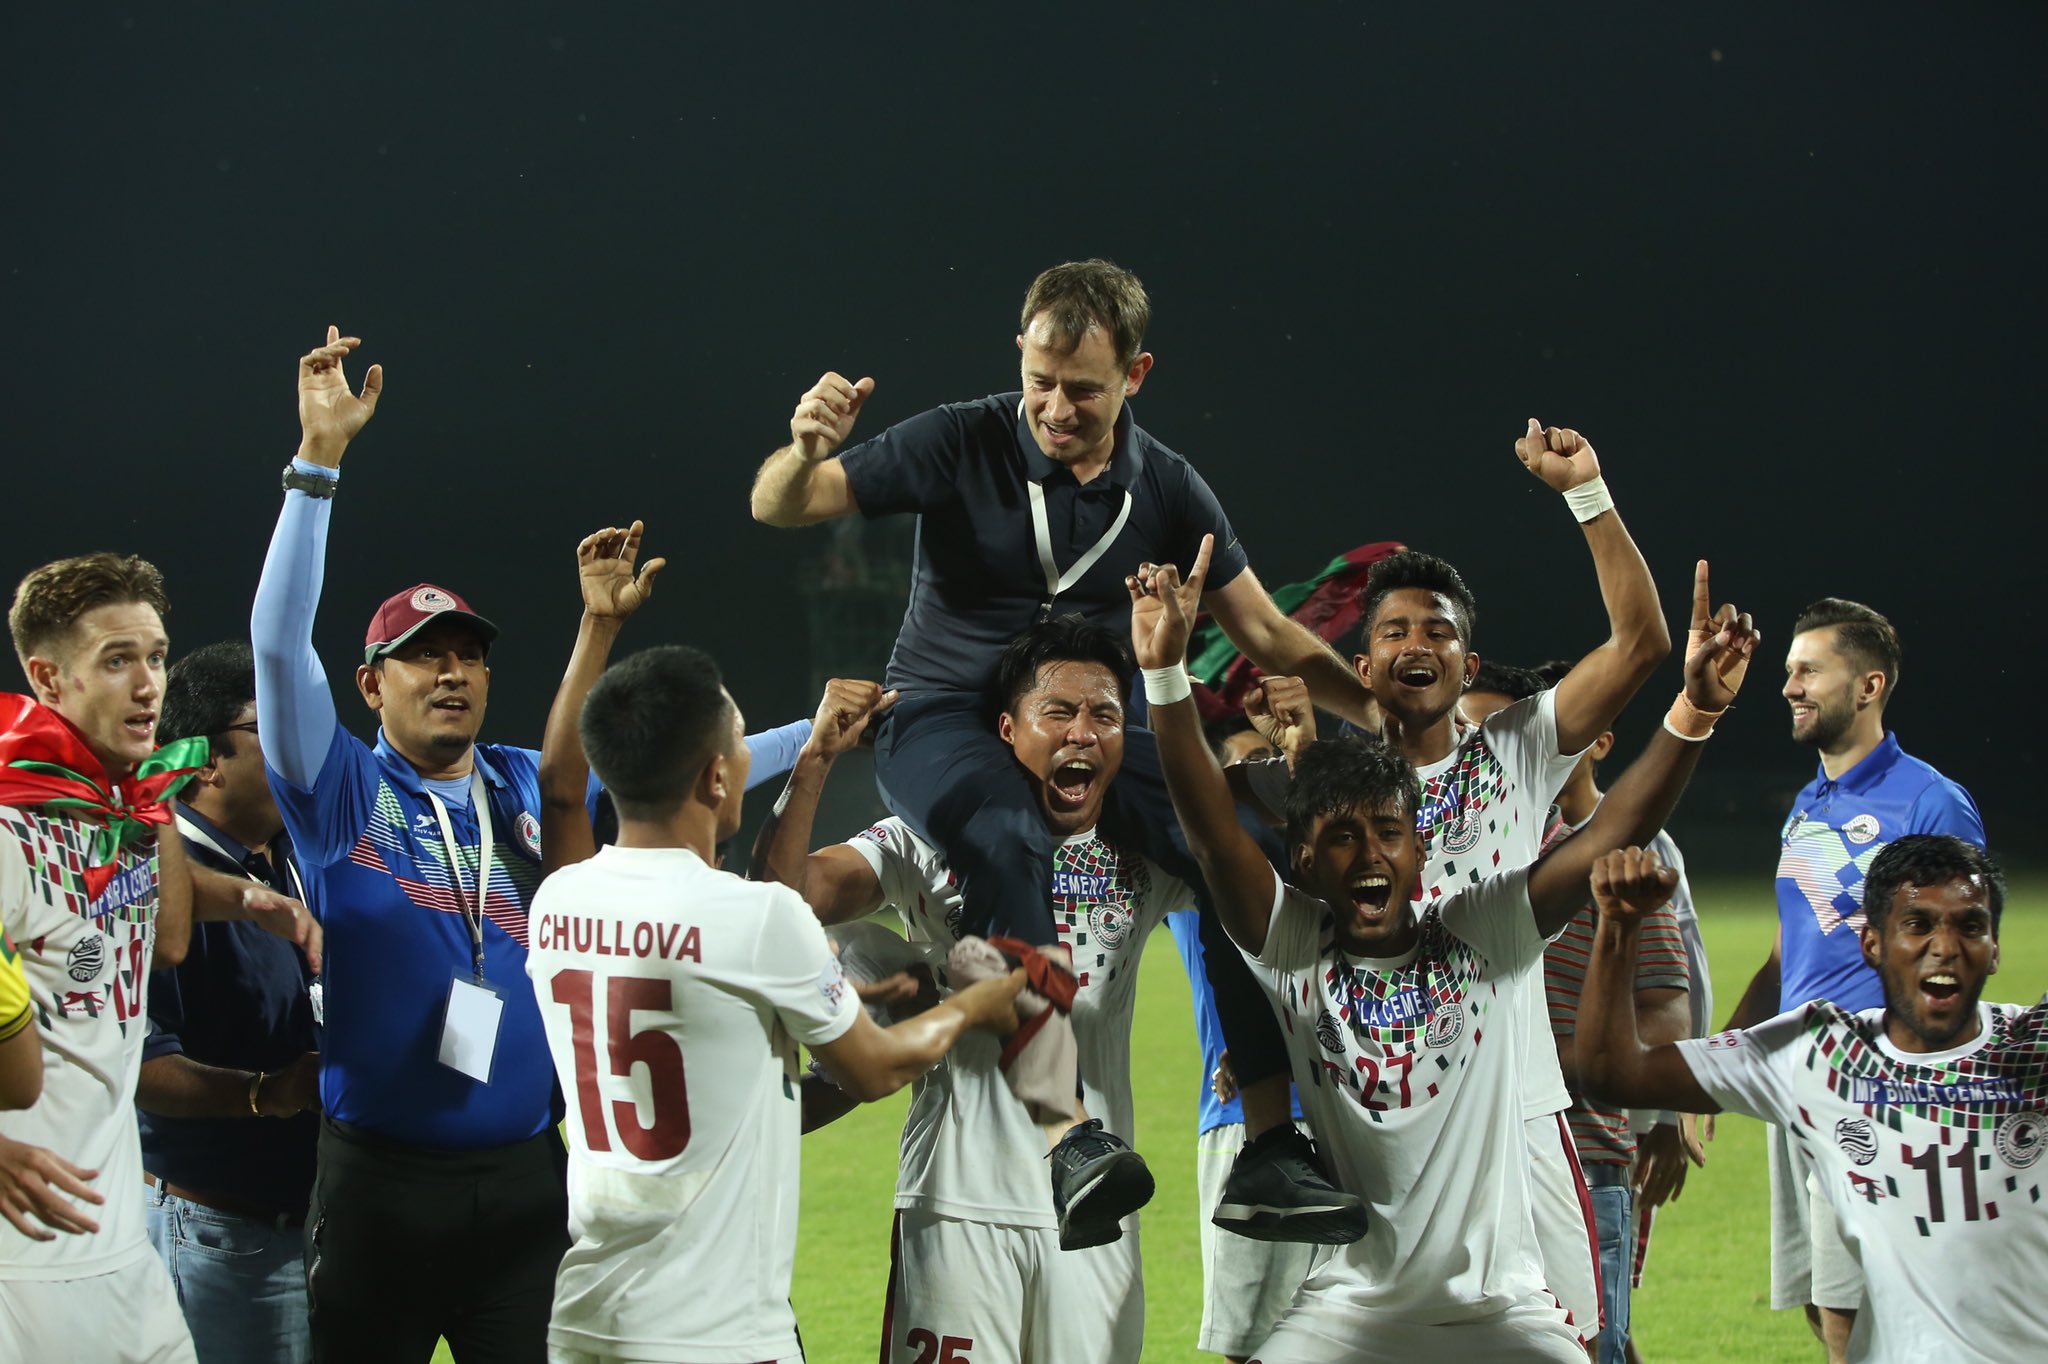 We will pay players their entire salaries after lockdown, states Mohun Bagan